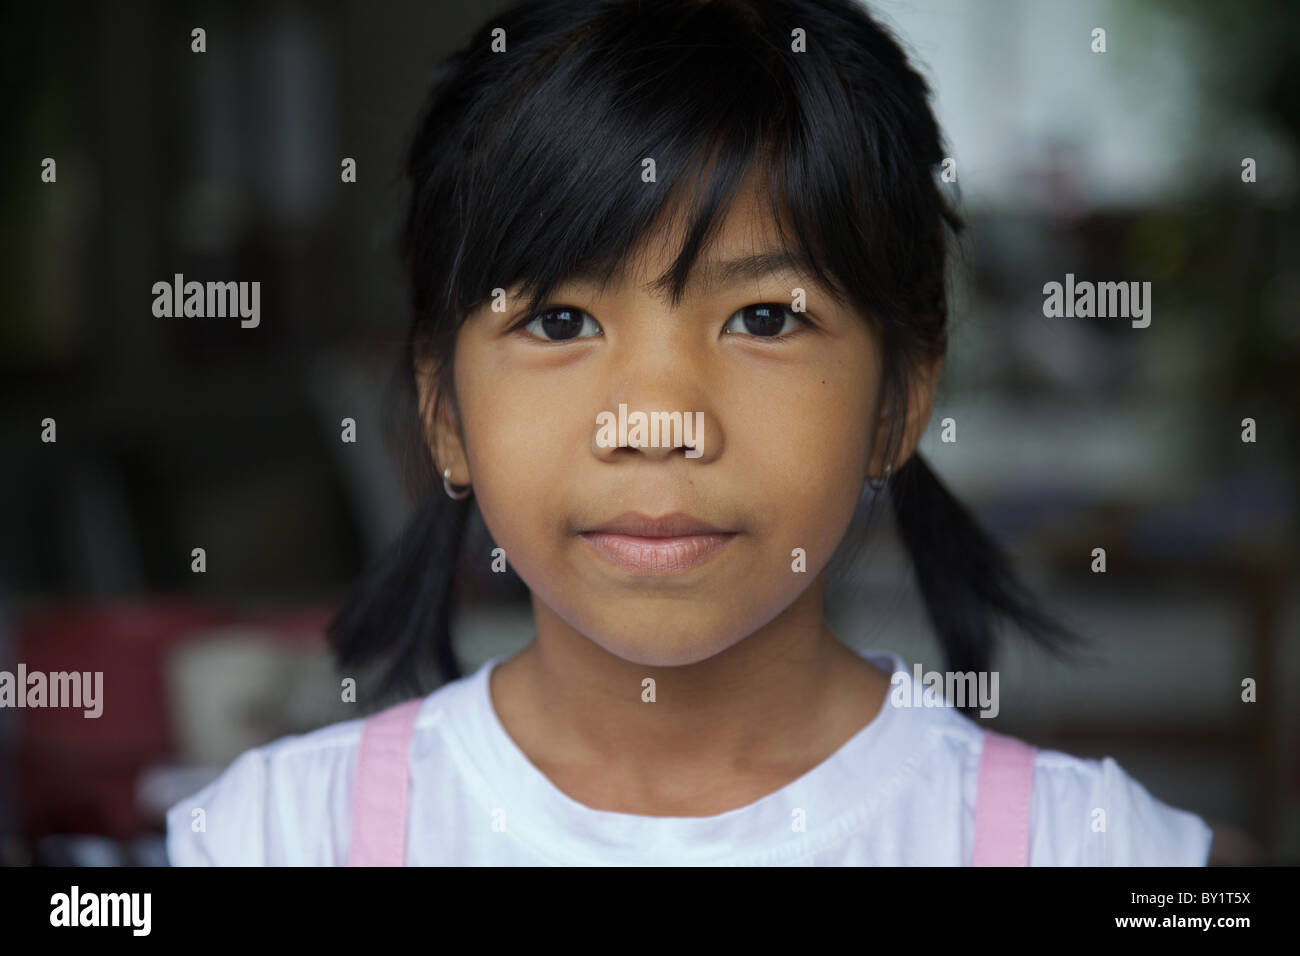 A young Thai Muslim girl looking at camera, Thailand Stock Photo - Alamy